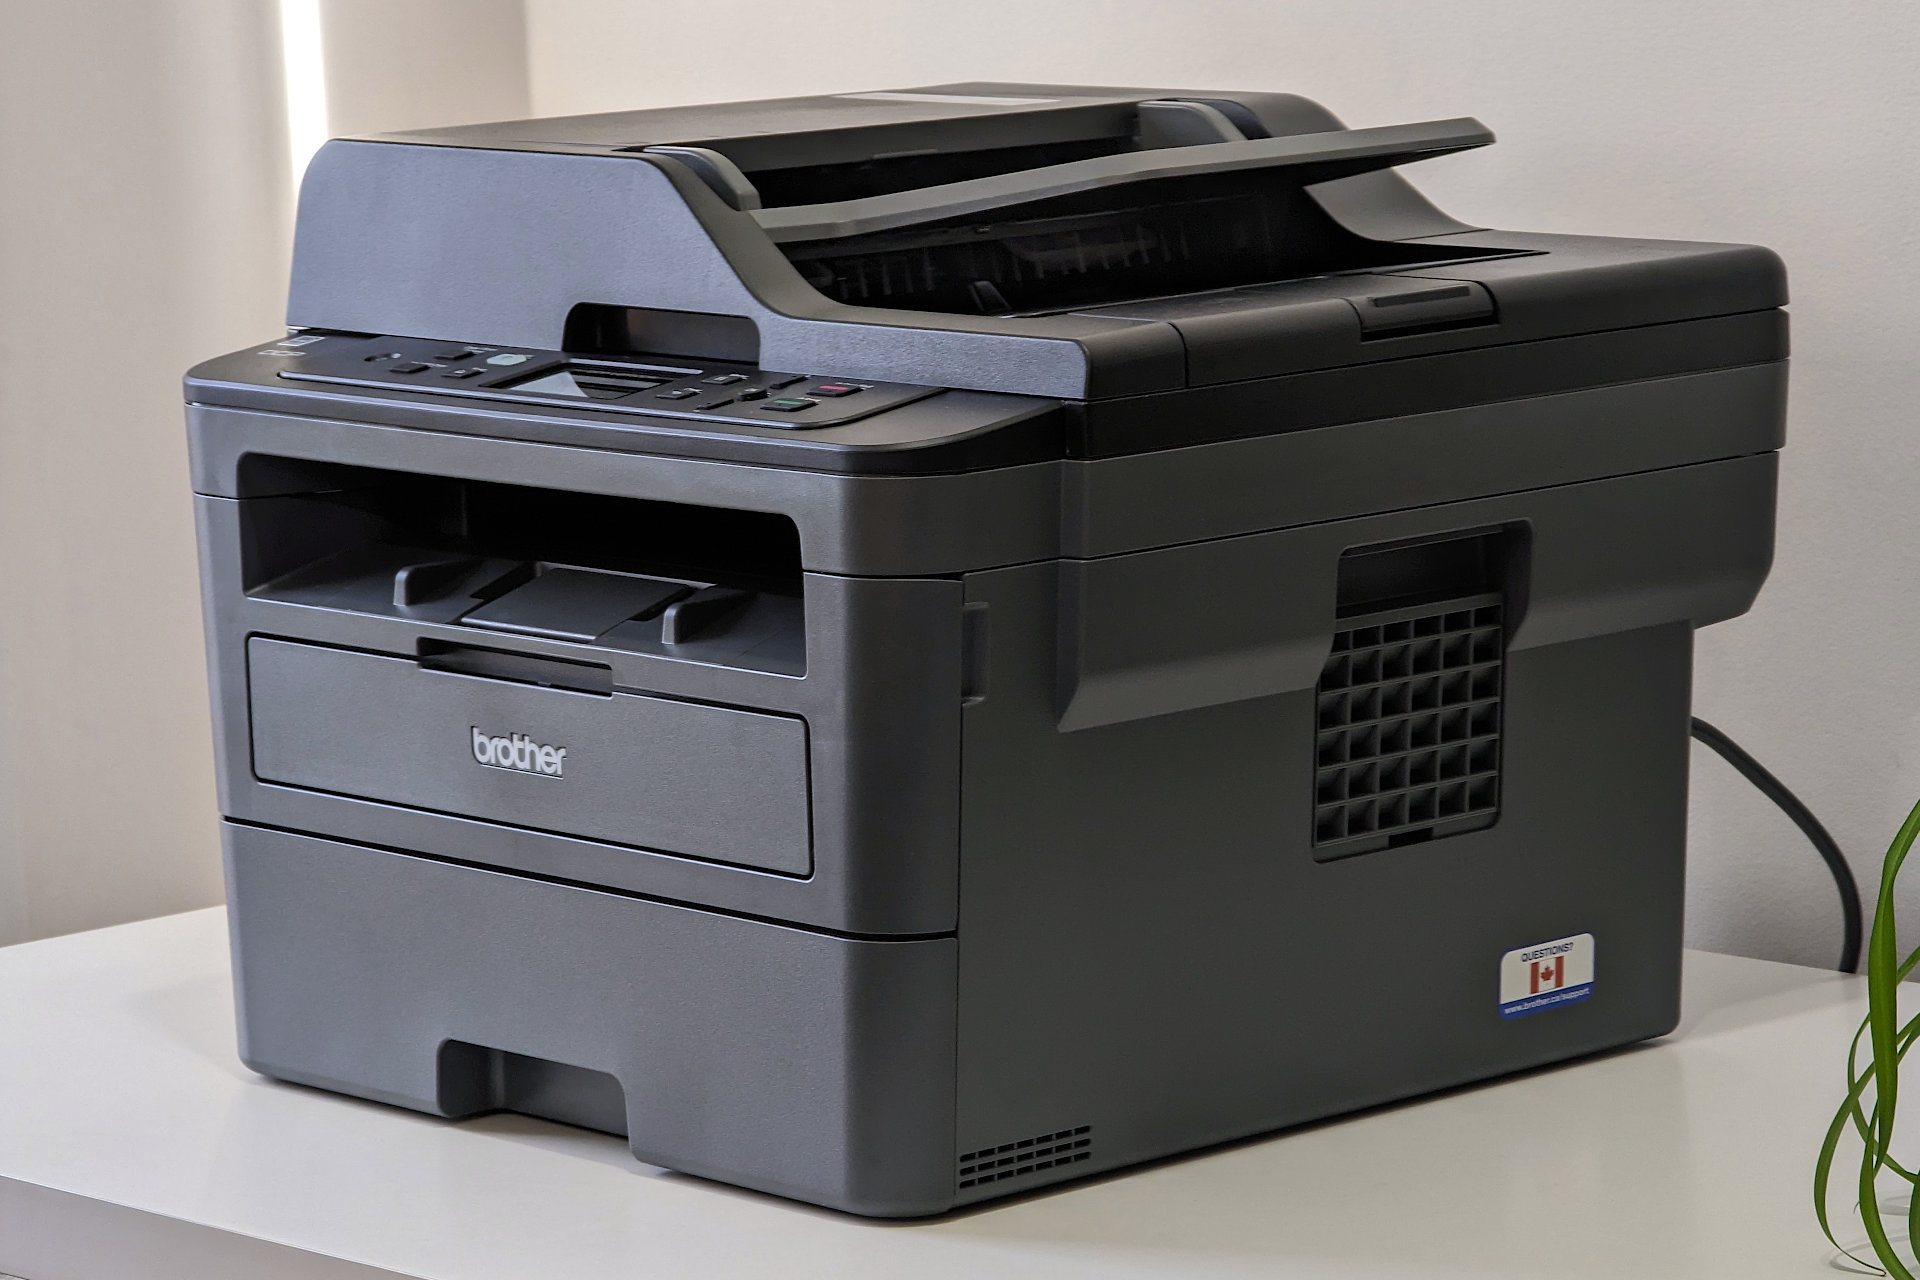 The Brother DCPL2550DW. has a tapered design with vents on both sides.